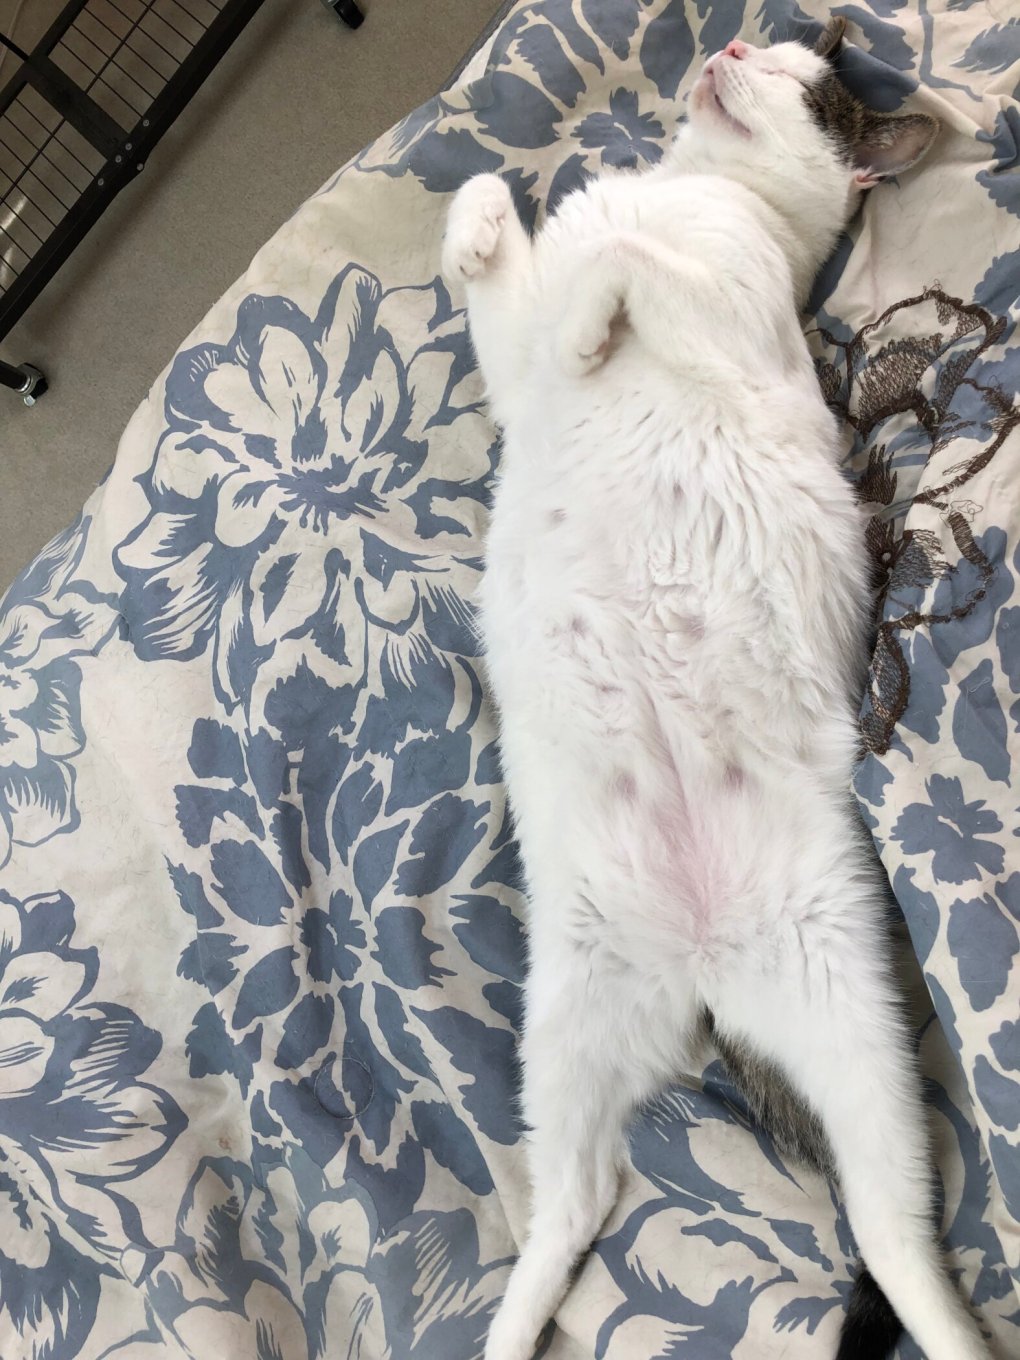 Join Tummy Rub Tuesday Week 467 and get your cat featured on our blog!